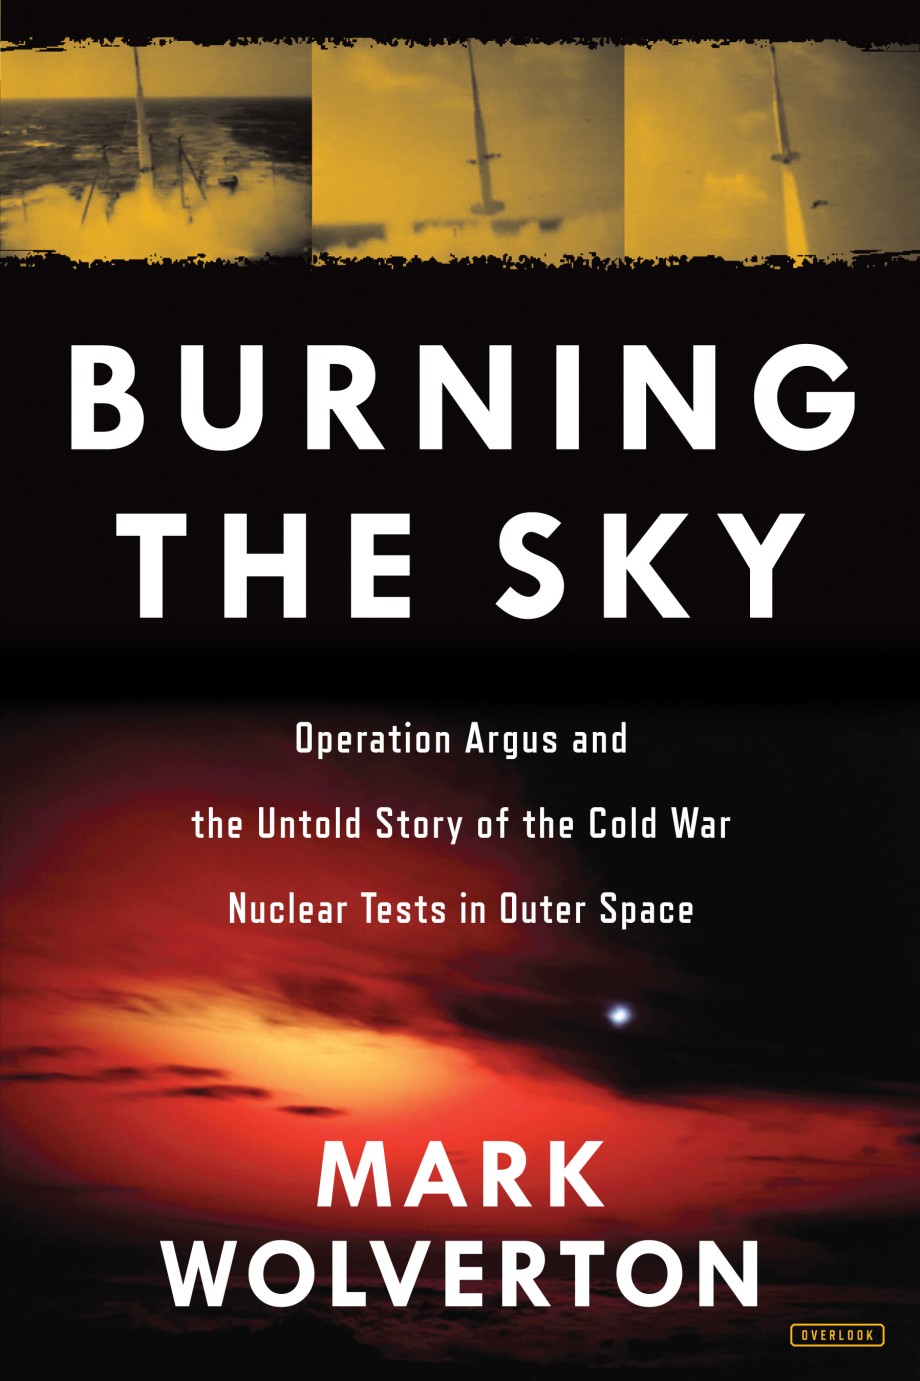 Burning the Sky Operation Argus and the Untold Story of the Cold War Nuclear Tests in Outer Space